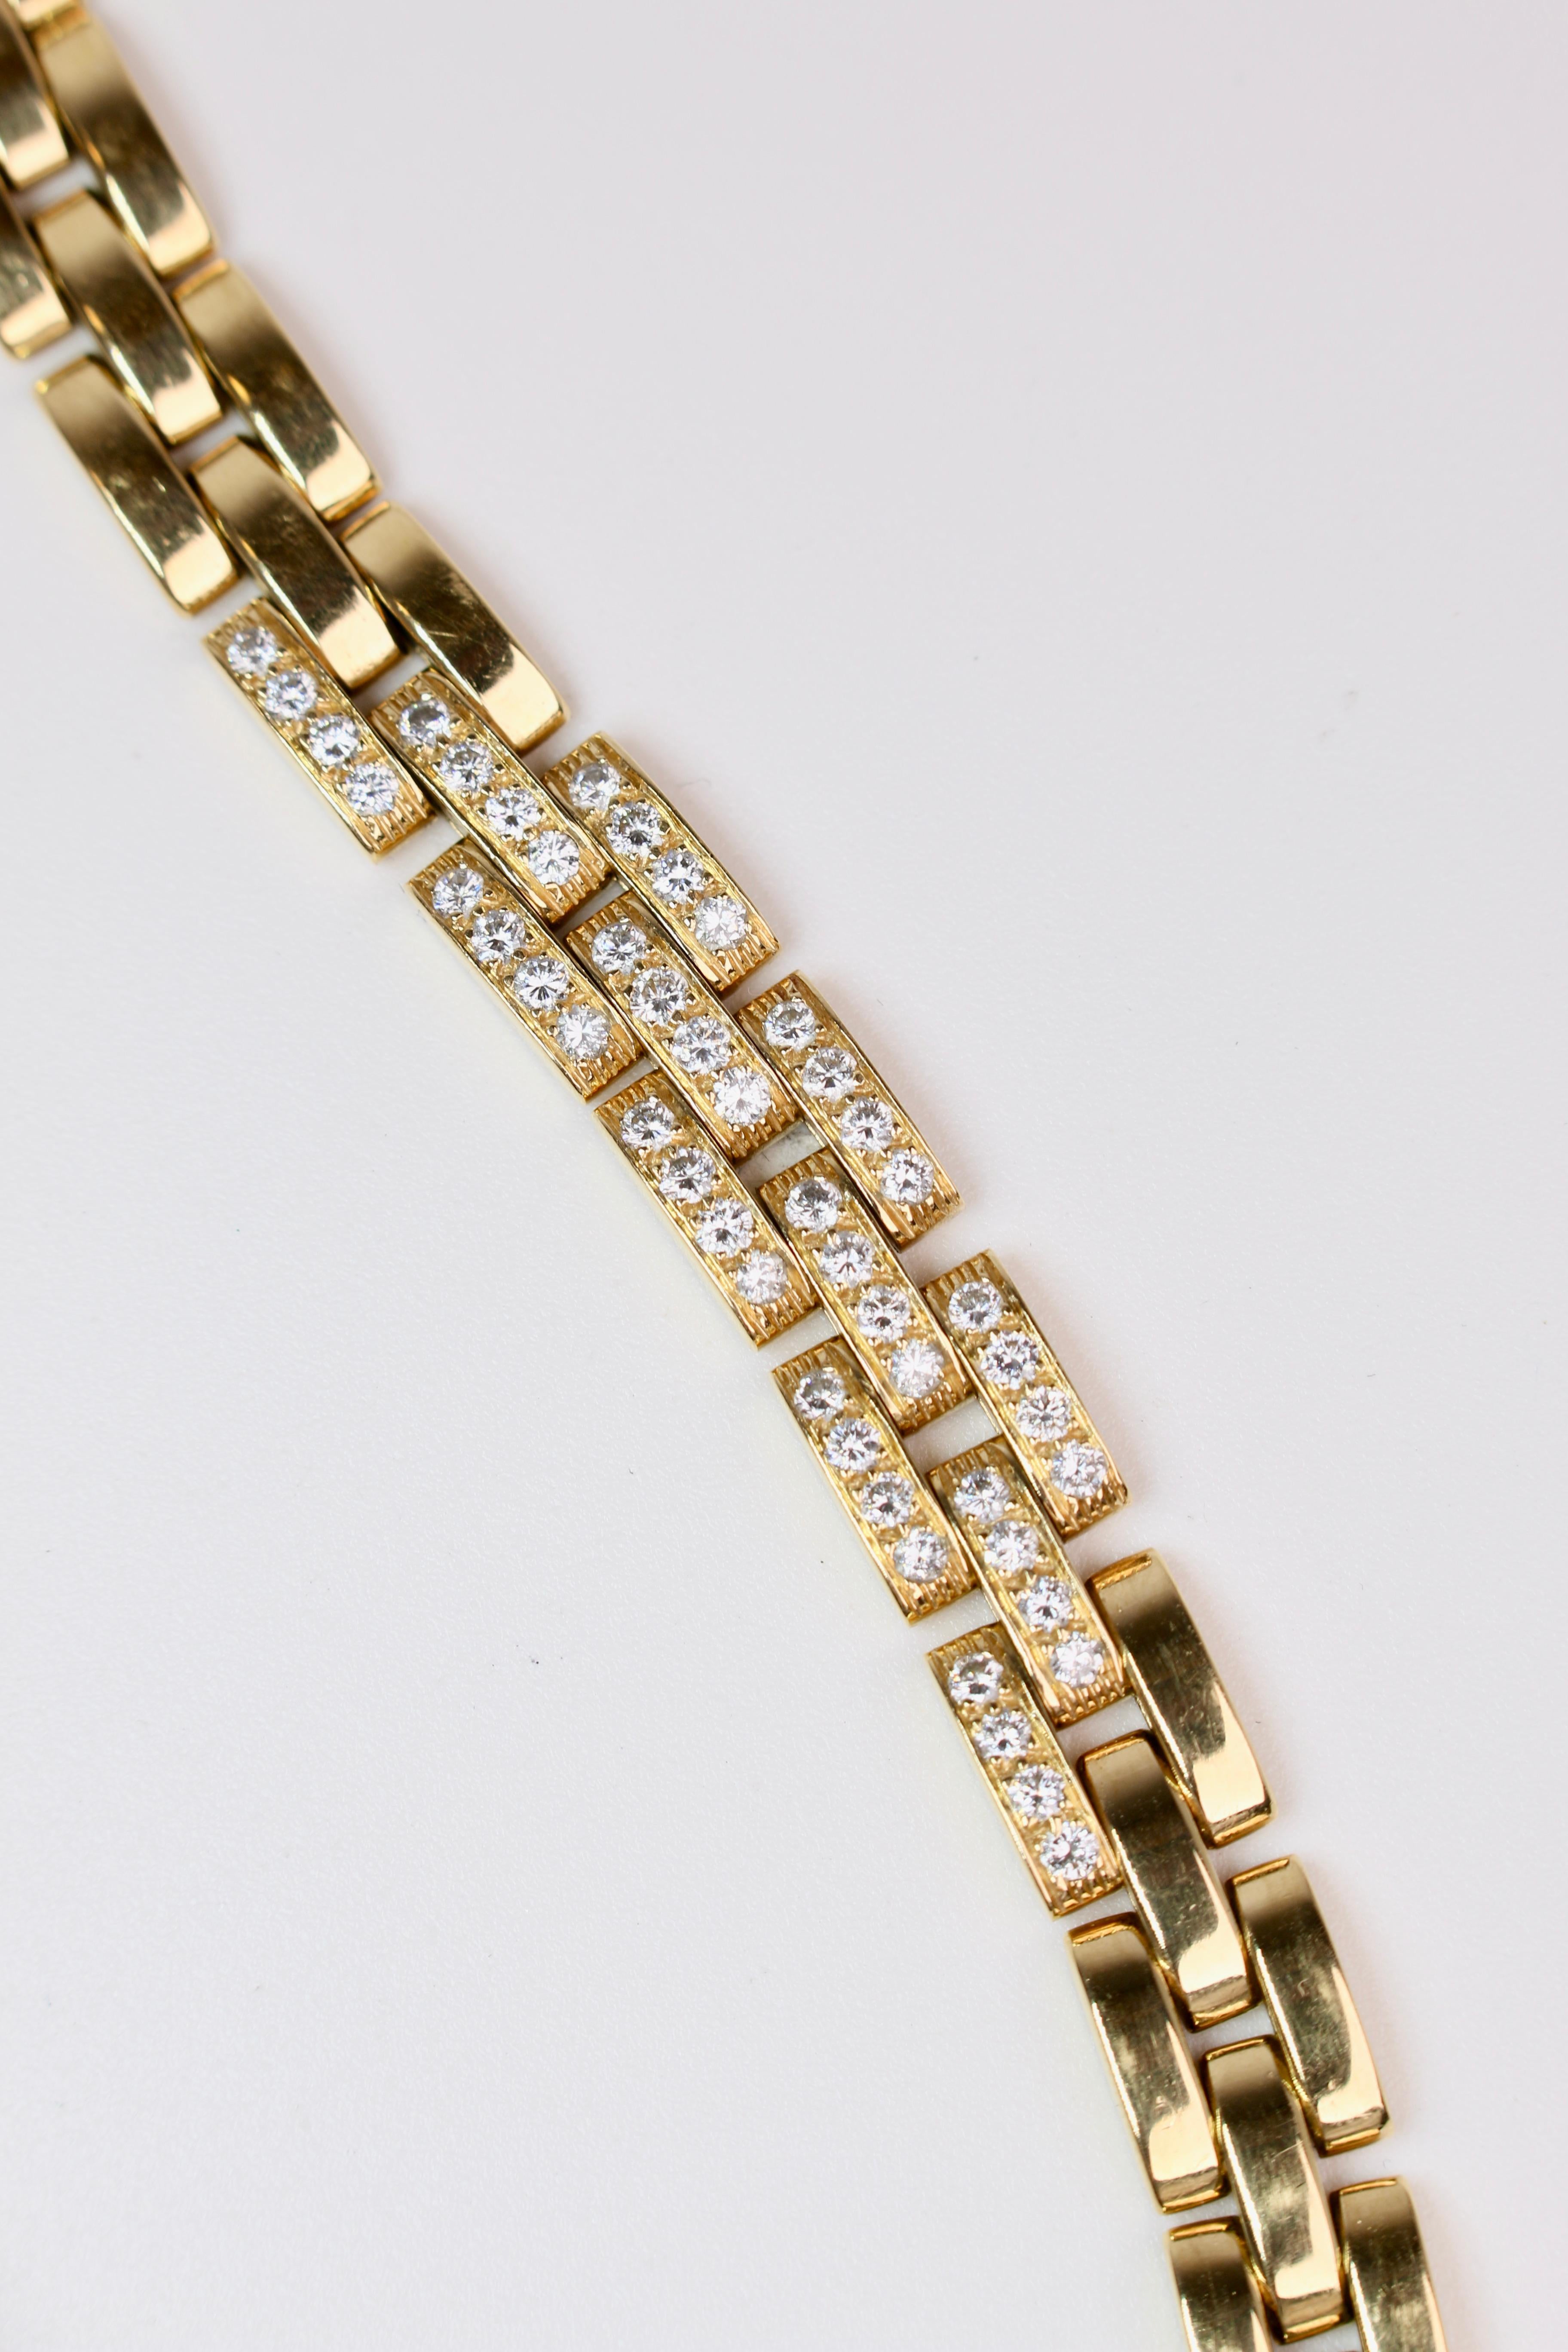 This 14k Yellow Gold Cartier Panther Link Bracelet is Stamped Cartier 750, features 48 round cut diamonds and measures 7.25 inches in length. The bracelet weighs in at 41.2 grams and is 3/8 an inch wide.